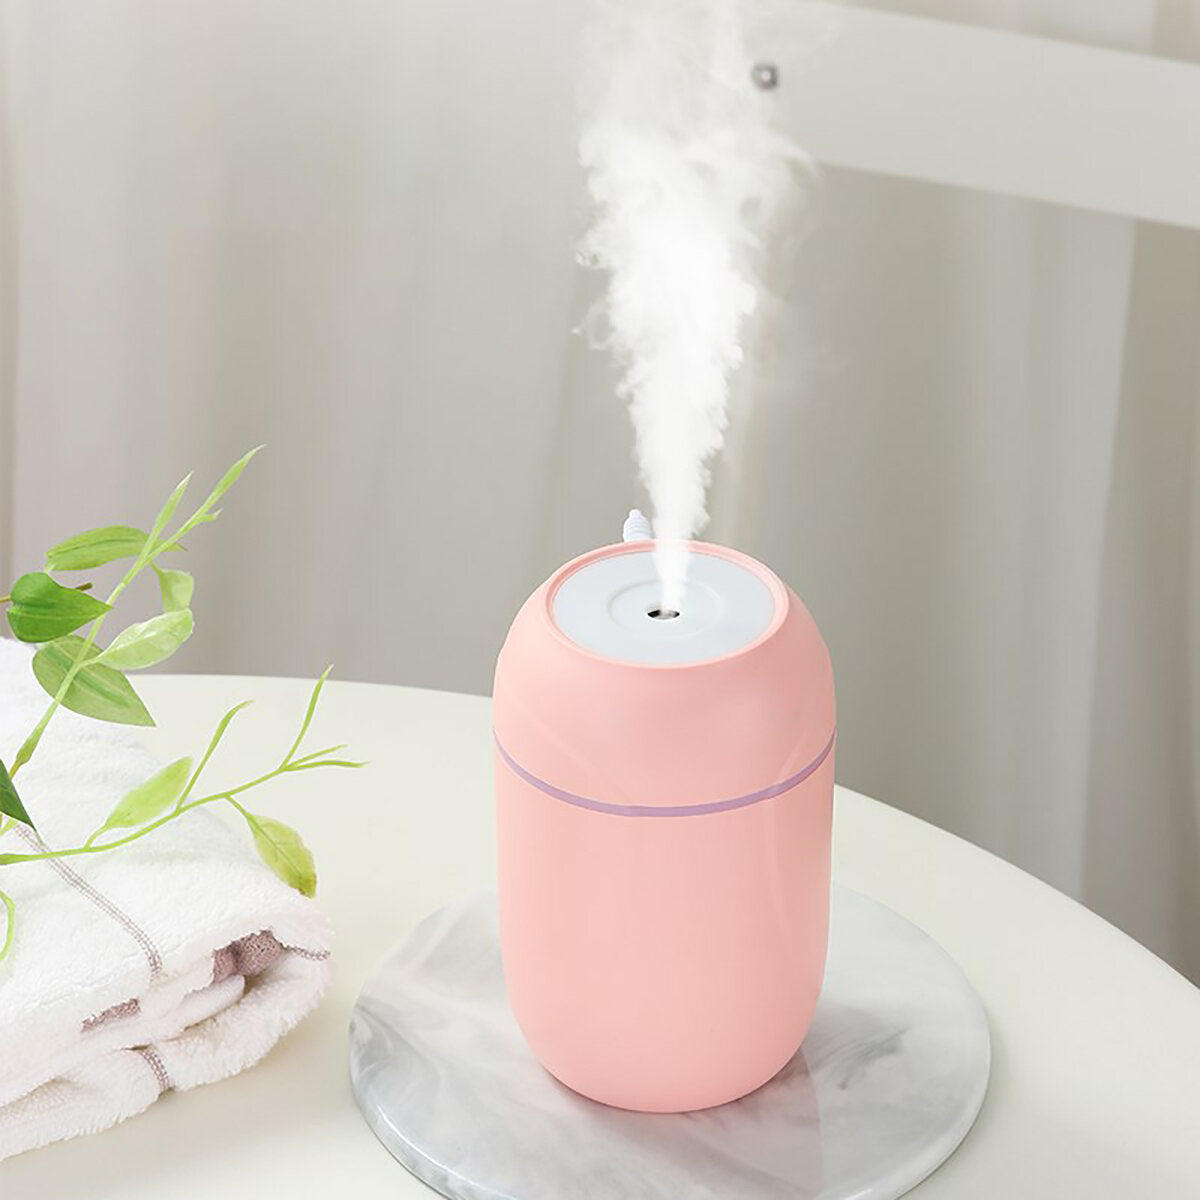 260ml USB Mini Humidifier Mist Diffuser 30-45ml/h with Colorful Night Light for Car Office Home